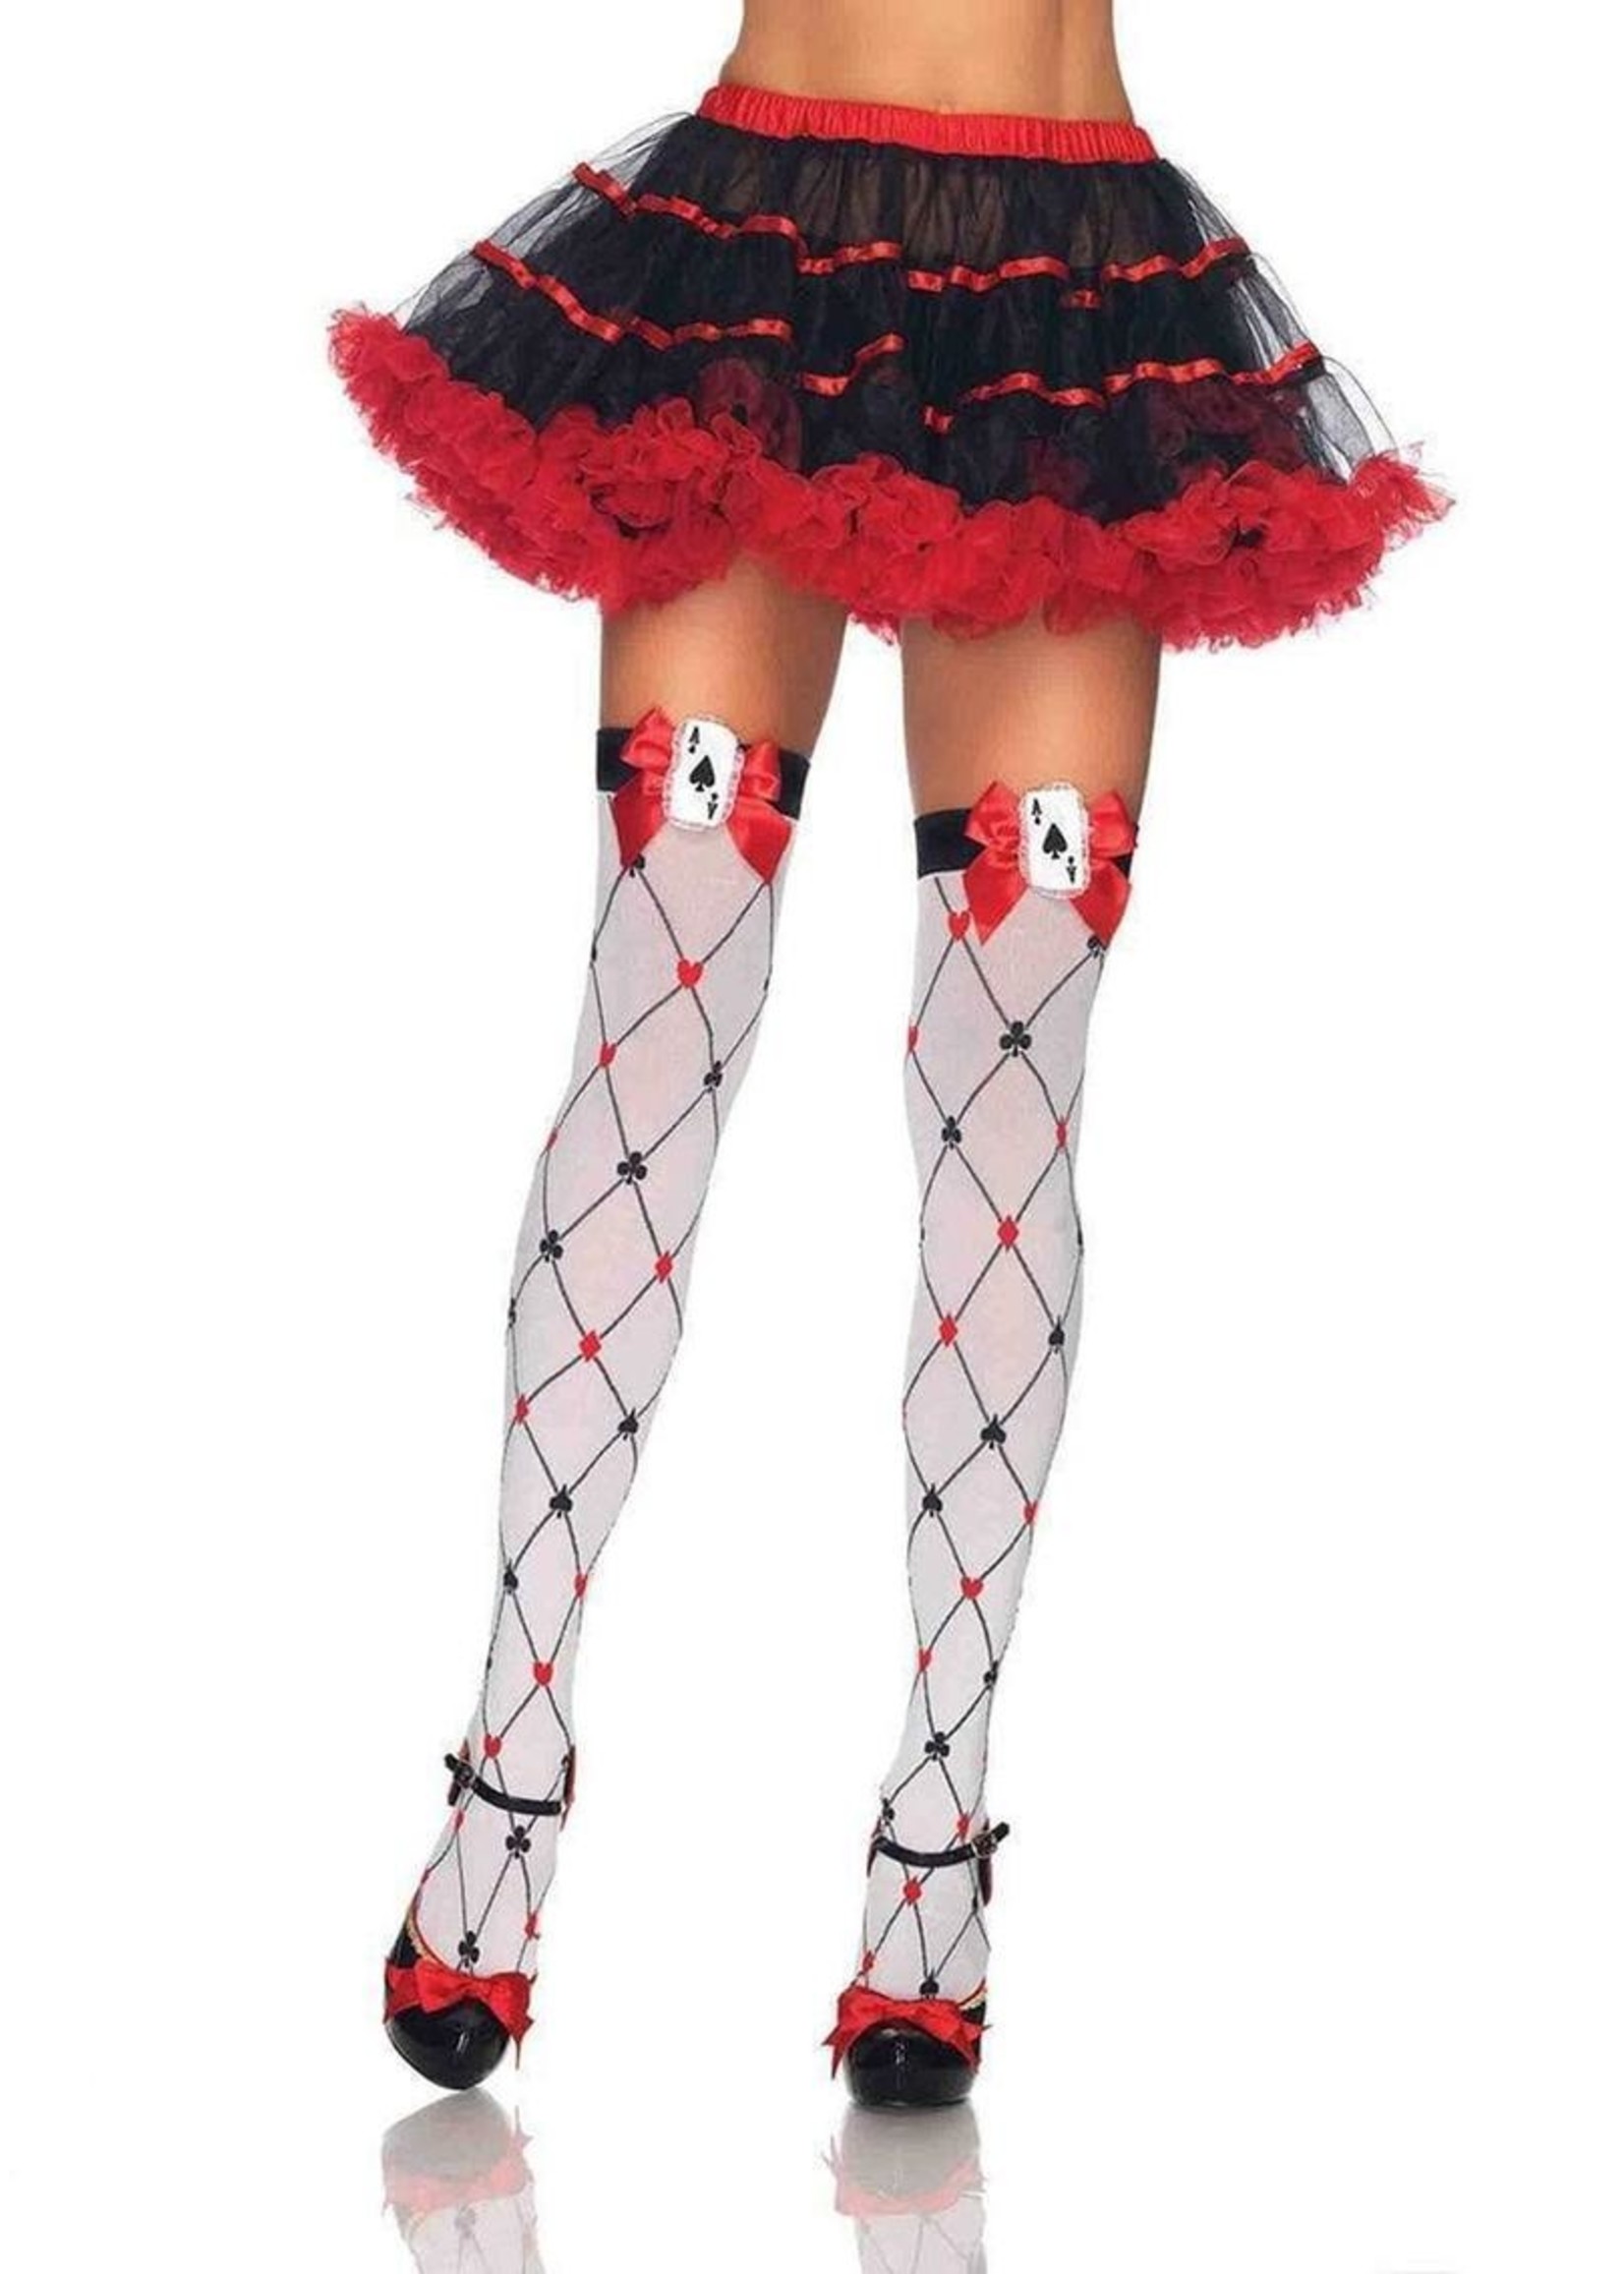 Woven Diamond Card Suit Thigh Highs with Bow and Card Charm - O/S in White/Red/Black